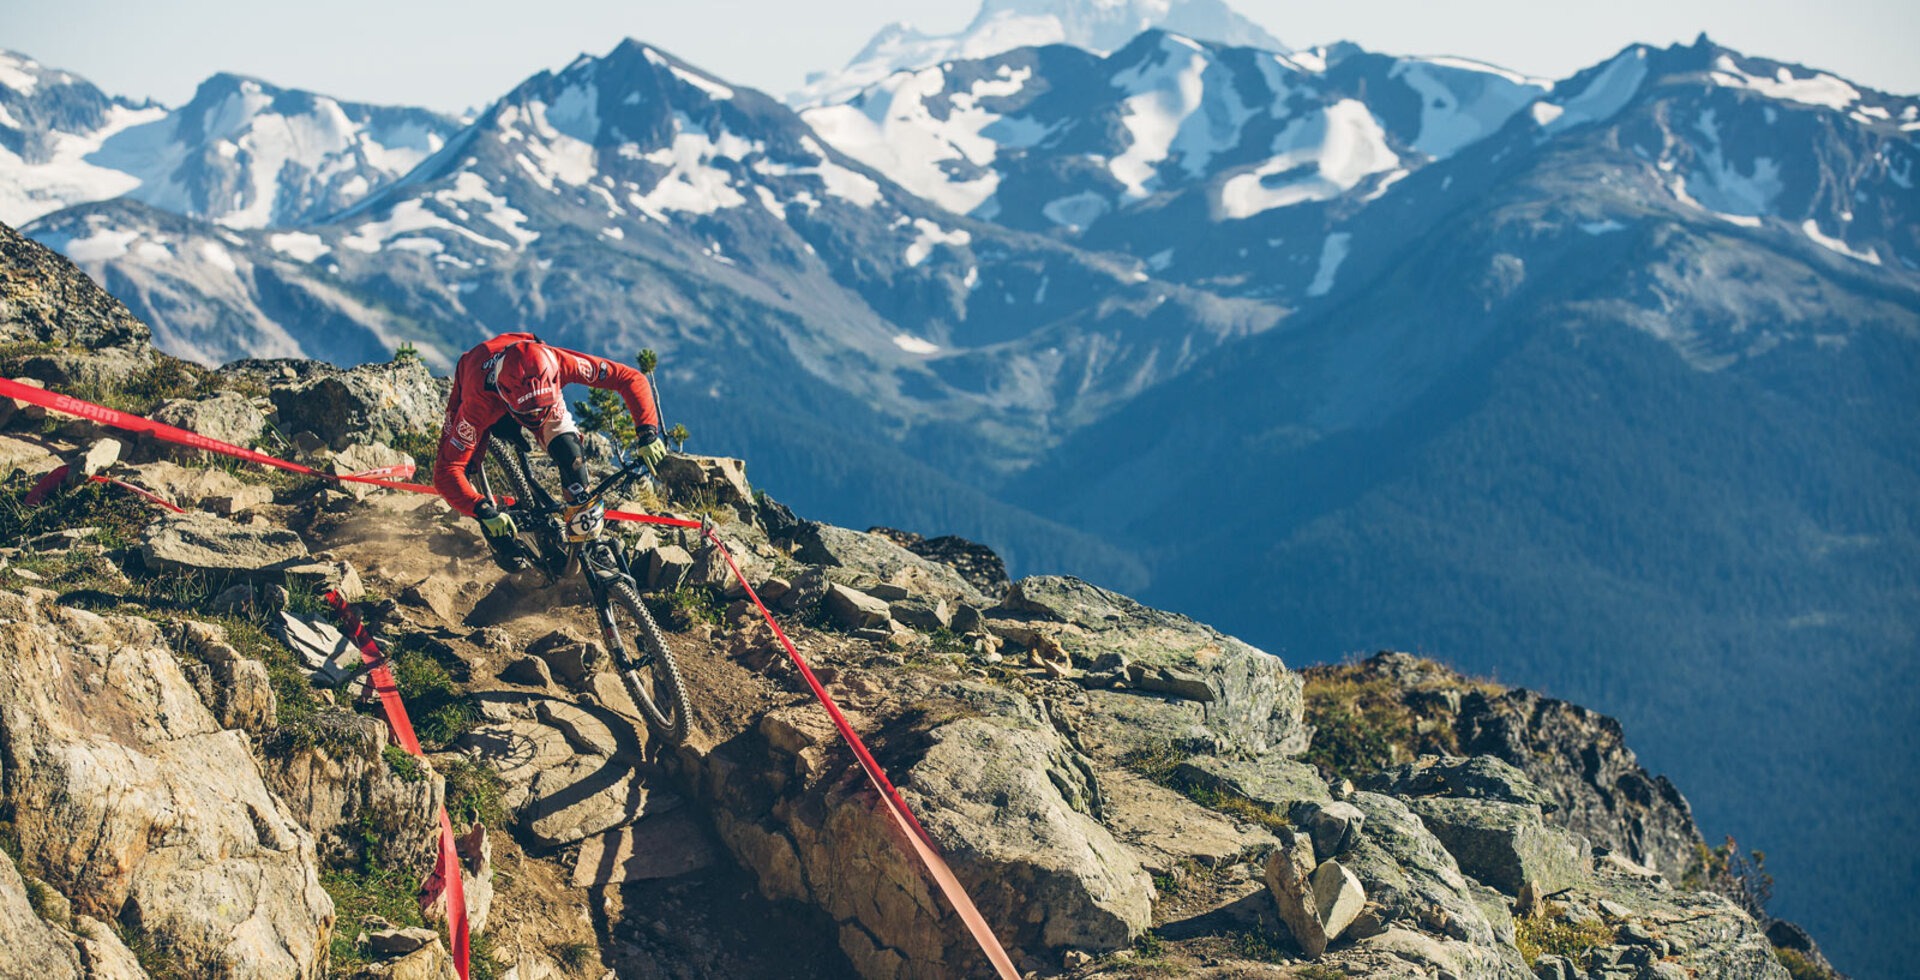 Duncan Riffle drops into Top of the World to start the fifth and final stage of the 2015 Crankworx Whistler Enduro race. This stage, which started above tree line at the top of Whistler Mountain and finished at the base of the Whistler Mountain Bike Park, is one of the longest and most technically demanding in the short history of enduro racing.